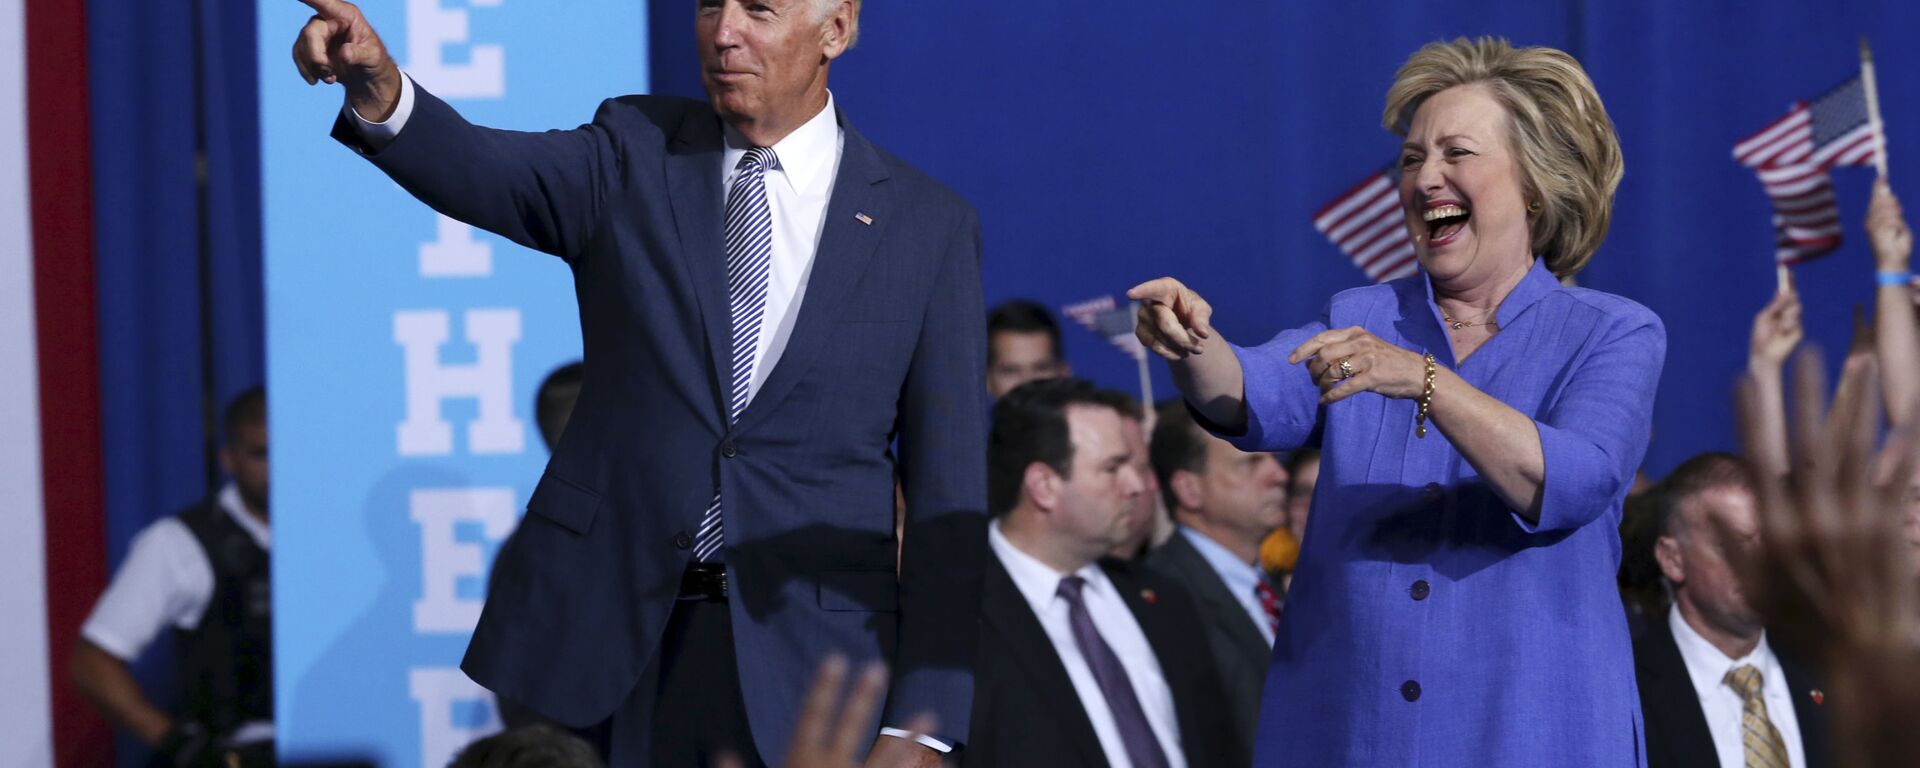 Democratic presidential candidate Hillary Clinton, right, and Vice President Joe Biden wave as they arrive at a campaign rally Monday, Aug. 15, 2016, in Scranton, Pa. - Sputnik International, 1920, 25.05.2022